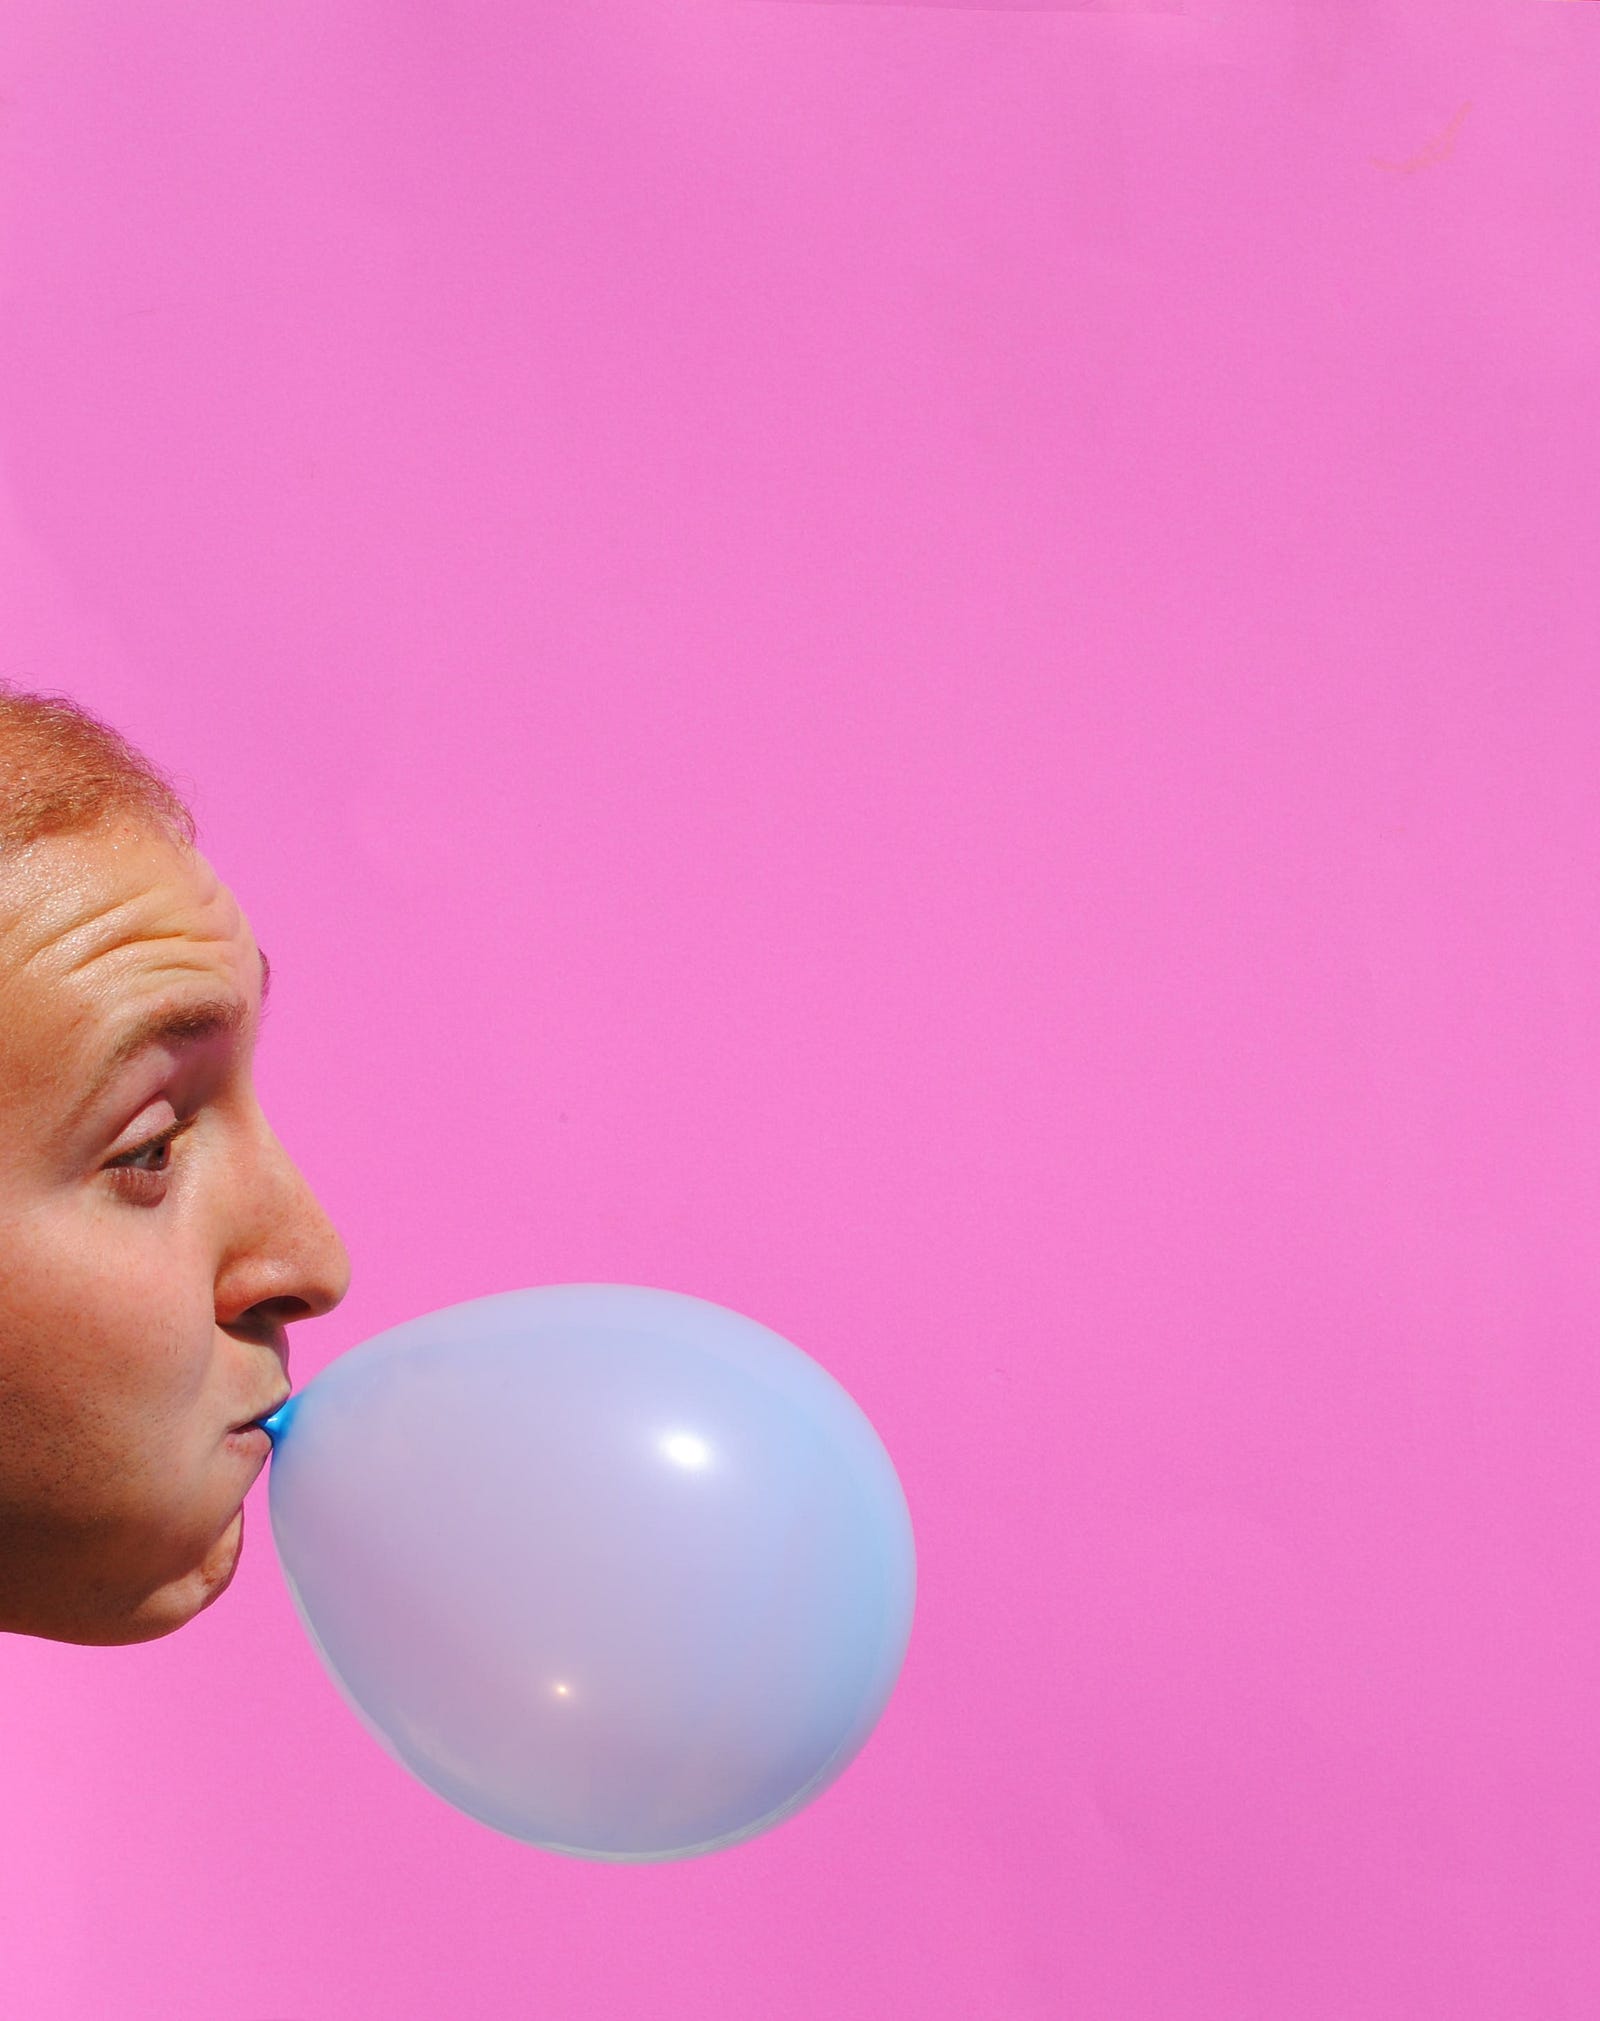 A young man in the lower right corner blows up a blue balloon. One study discovered that individuals who chewed throughout long- and short-term memory tests had better scores than those who did not.